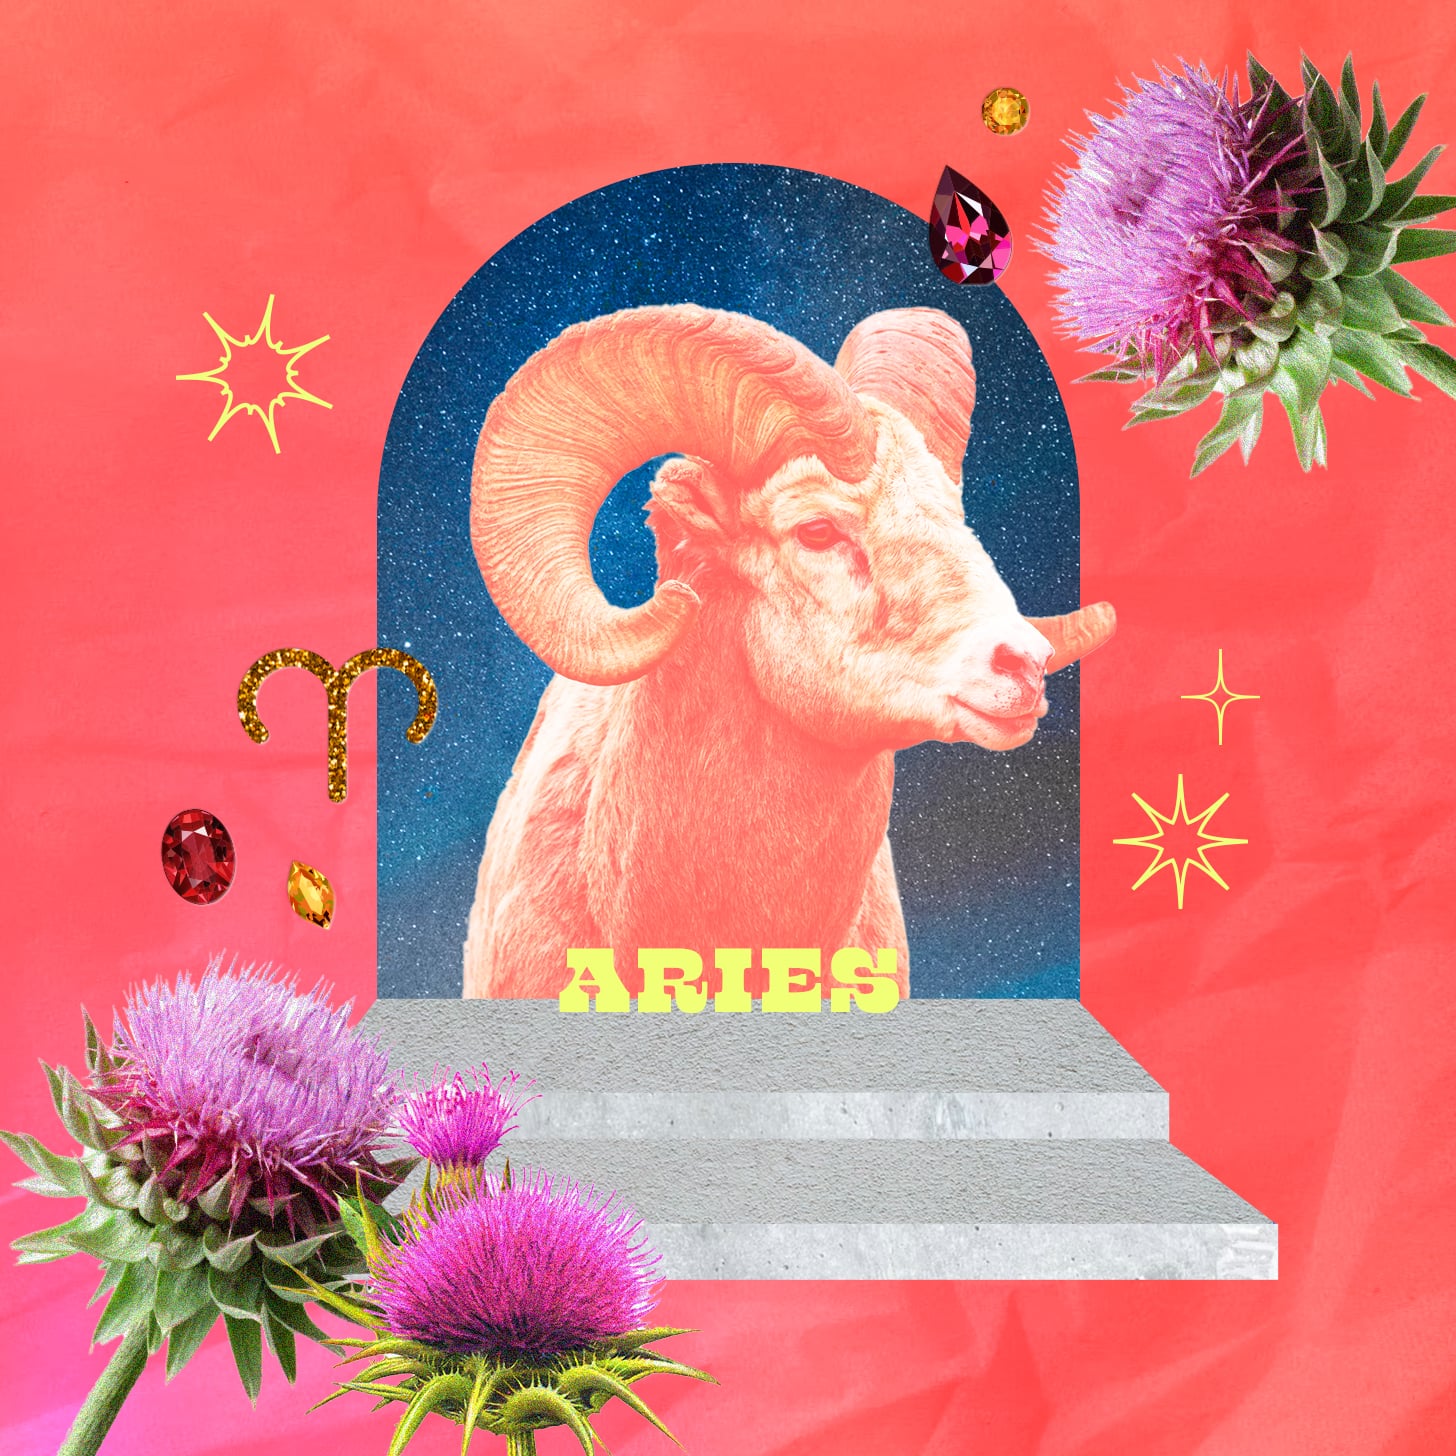 Aries weekly horoscope for august 14, 2022